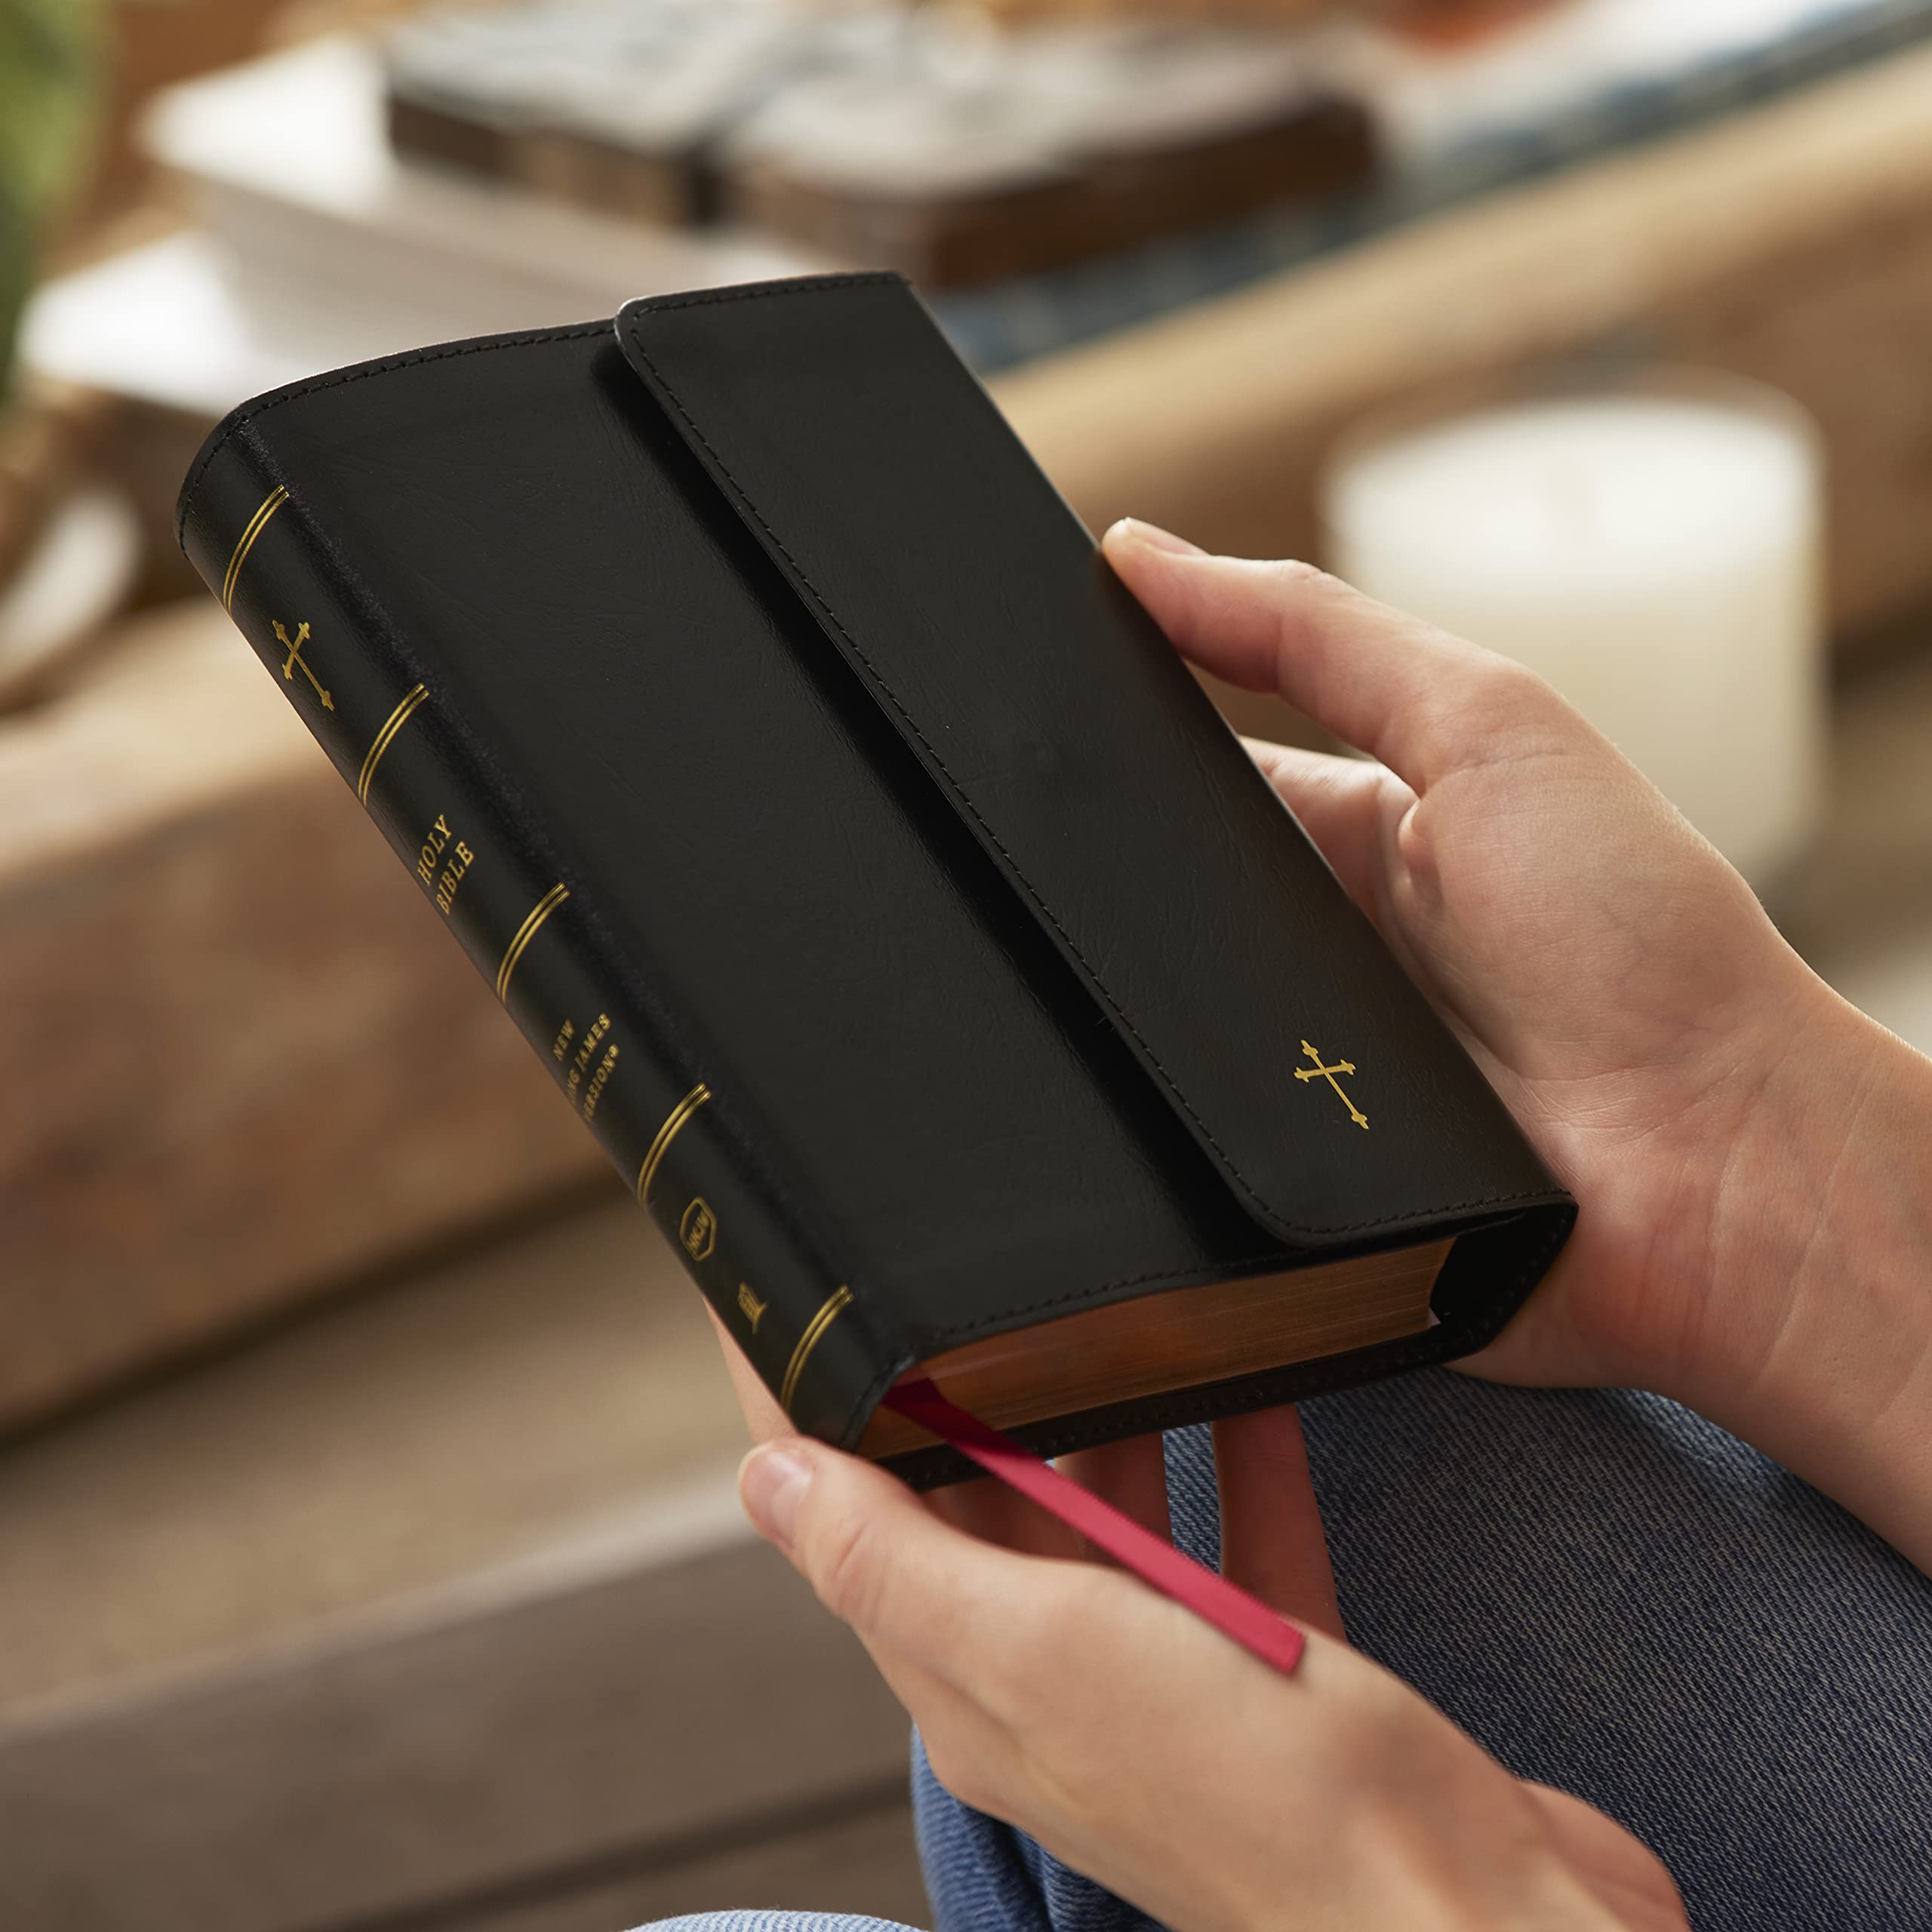 NKJV Compact Paragraph-Style Bible w/ 43,000 Cross References, Black Leatherflex w/ Magnetic Flap, Red Letter, Comfort Print: Holy Bible, New King James Version: Holy Bible, New King James Version